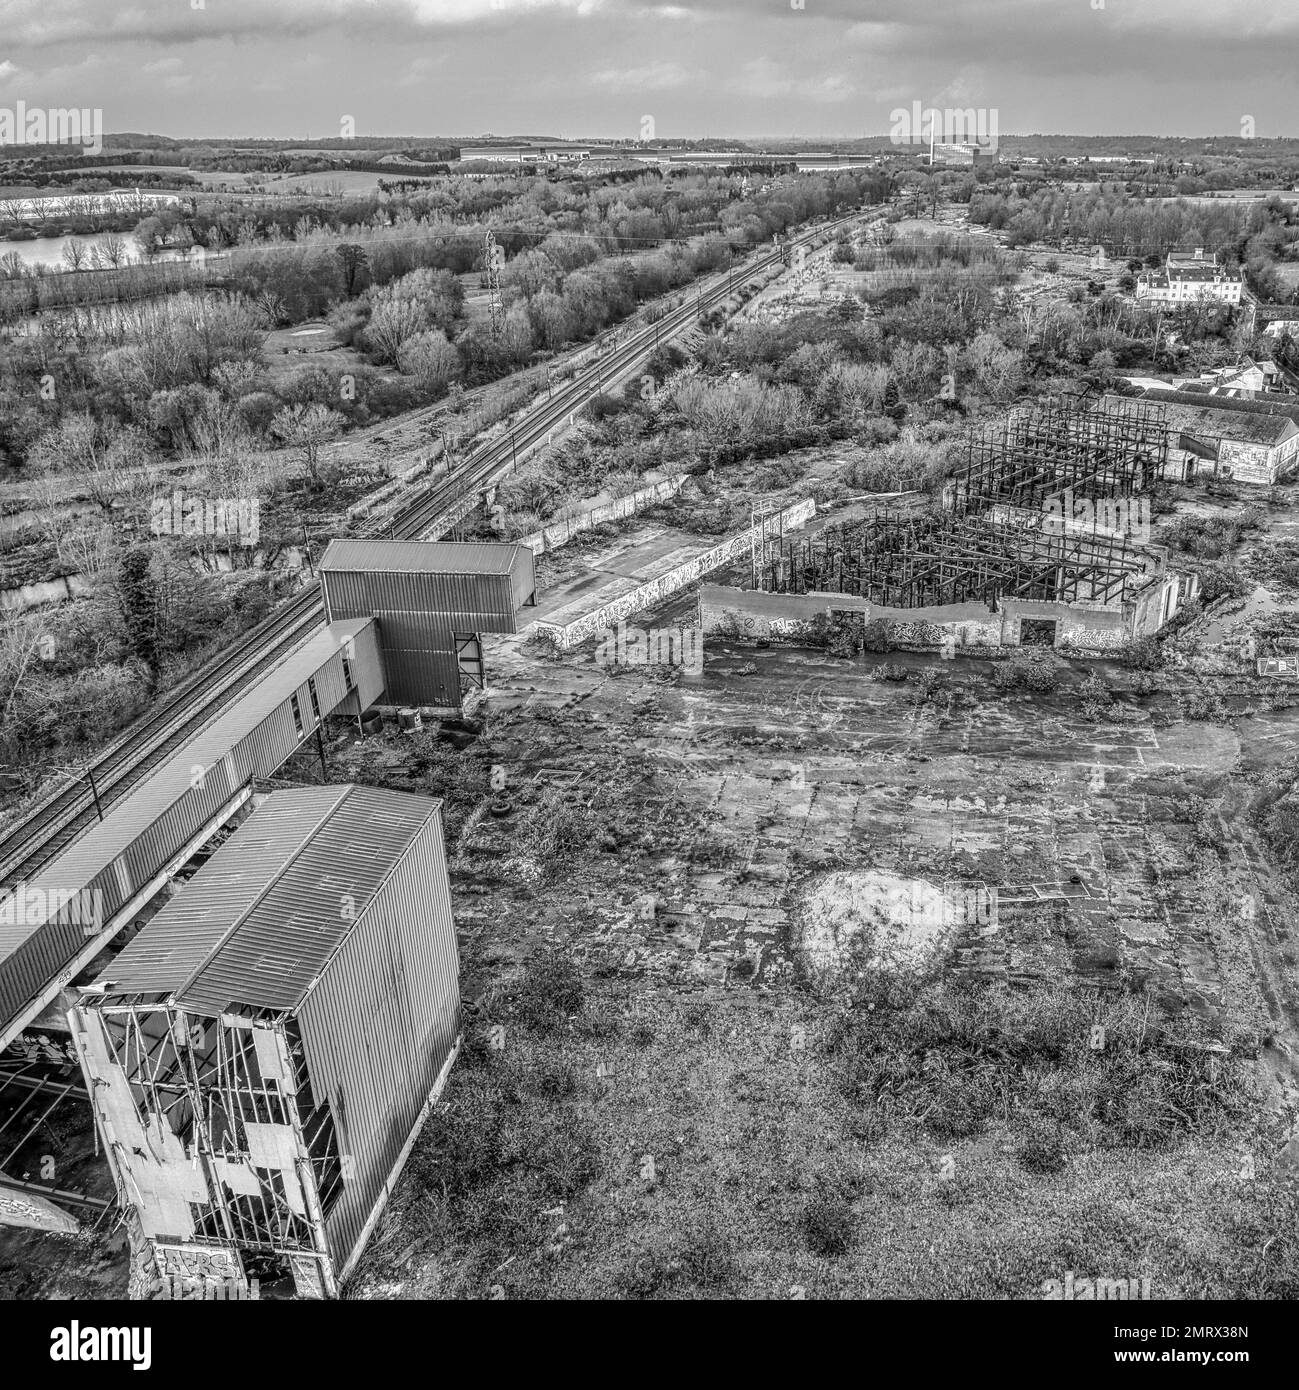 An aerial view of abandoned derelict Industrial buildings Stock Photo